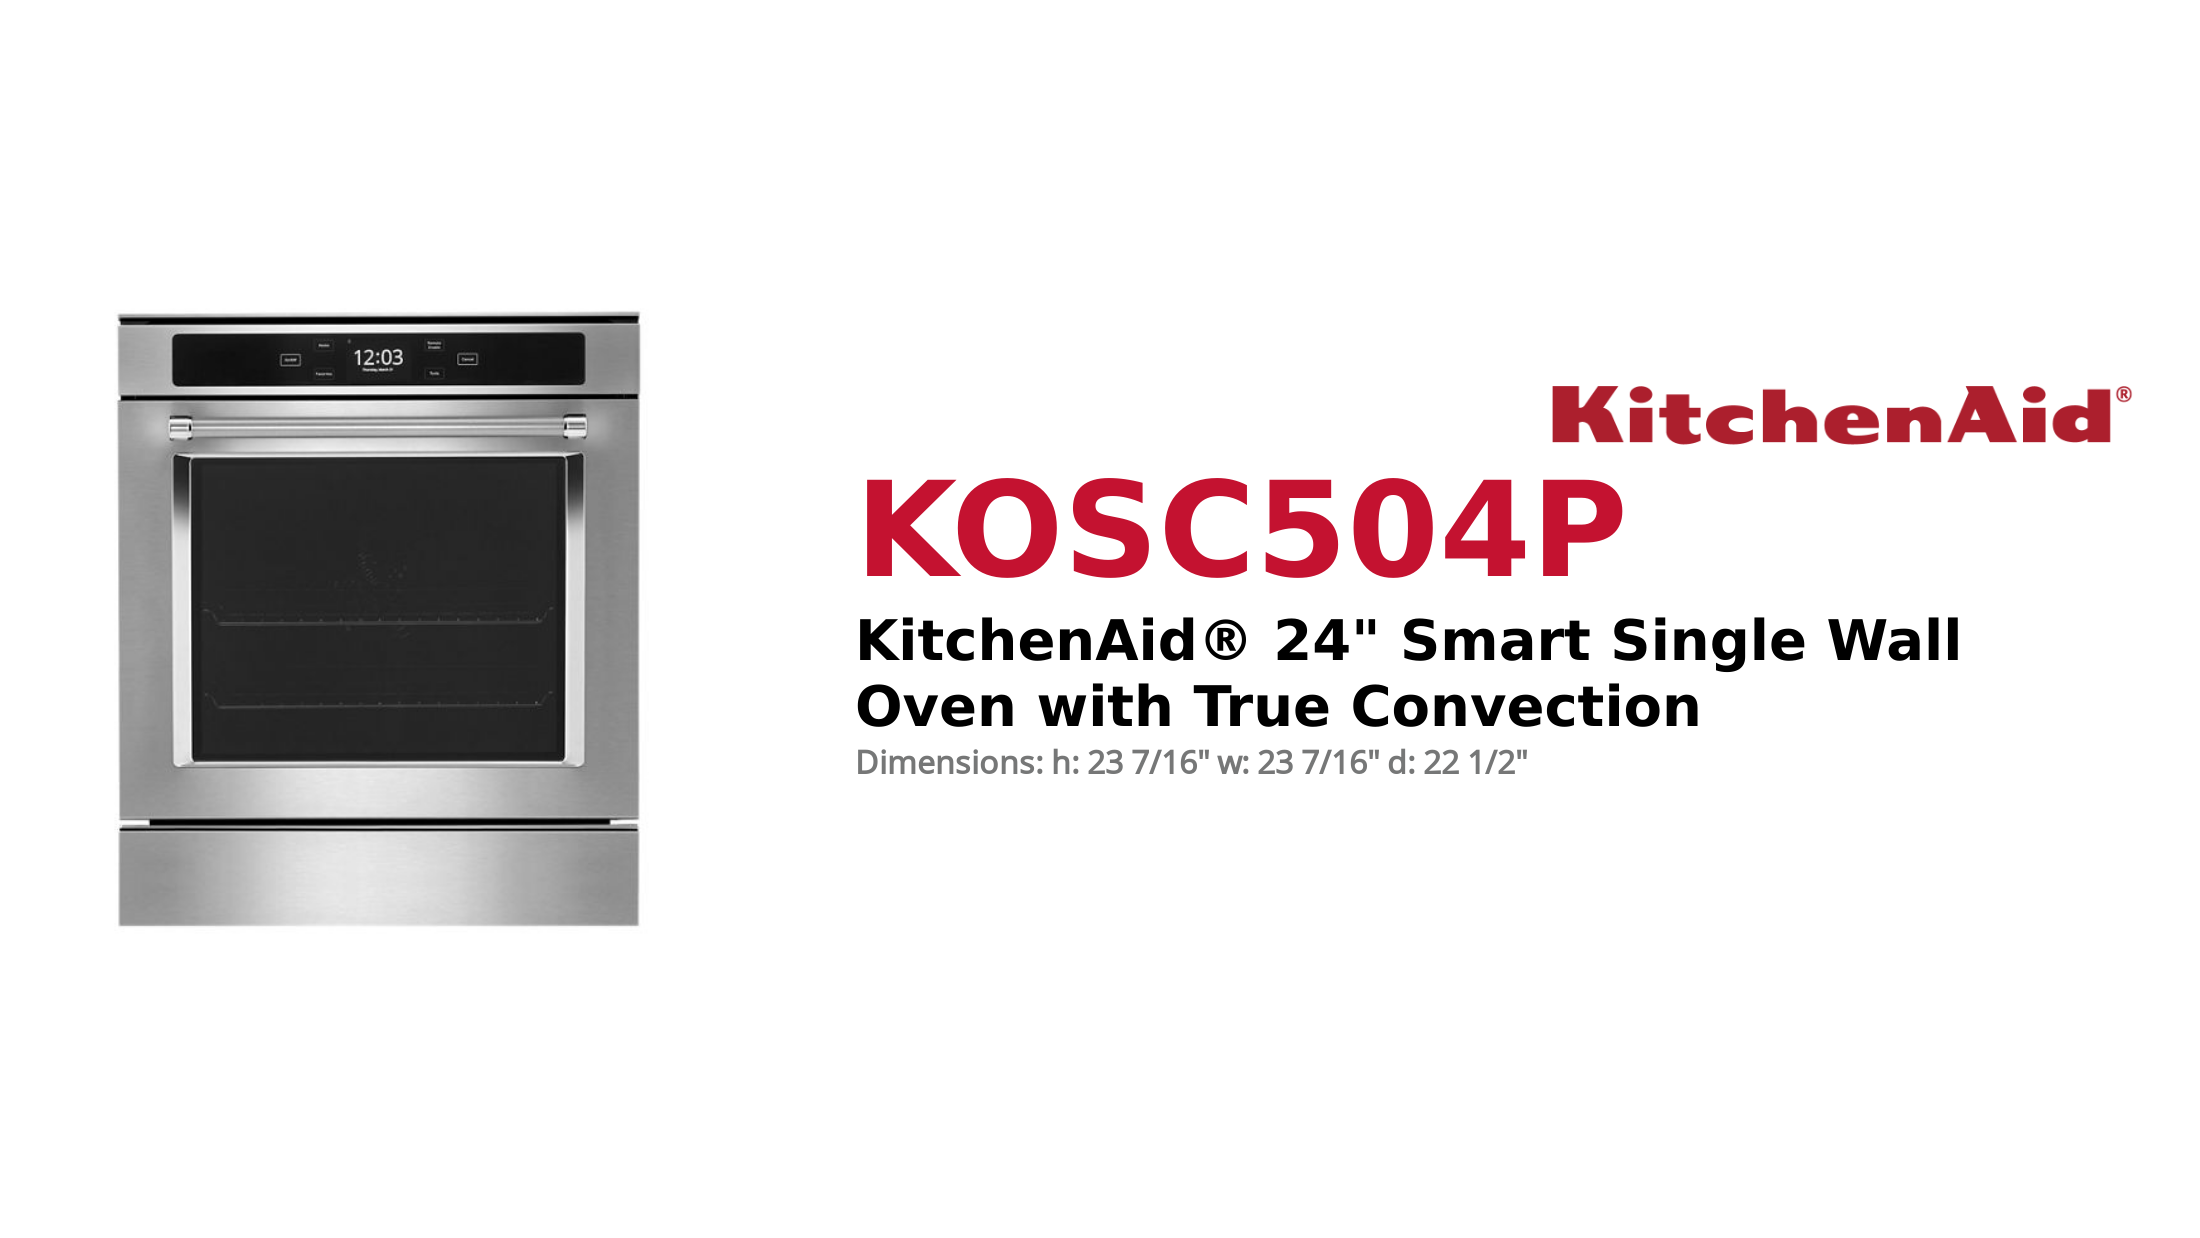 KitchenAid® 24 Smart Single Wall Oven with True Convection